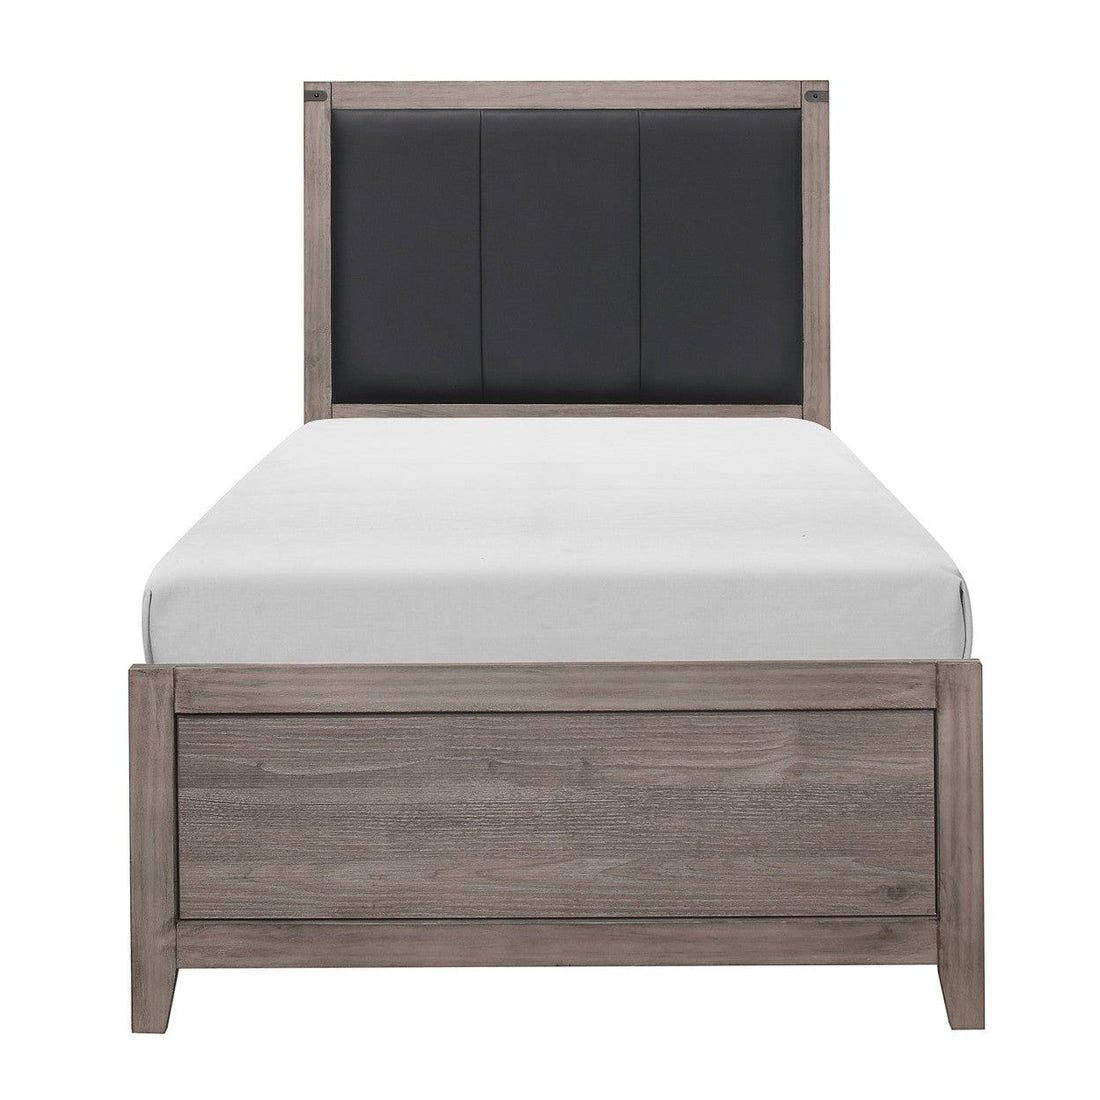 (2) TWIN BED, MELAMINE, BRW GRY/BLK 2042T-1*